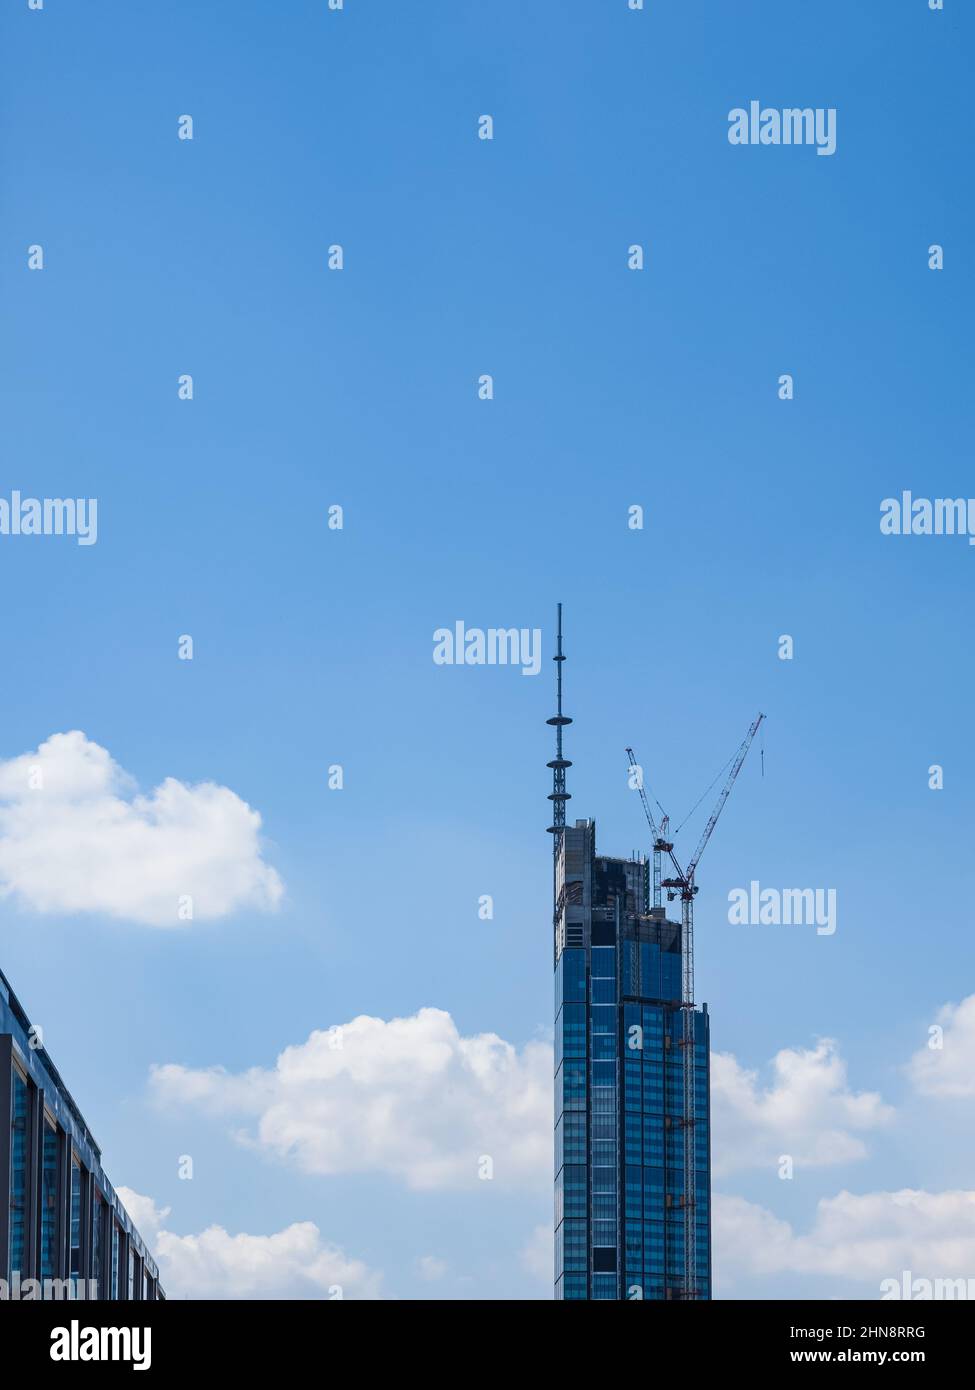 building of a modern skyscraper, front view over blue sky background Stock Photo